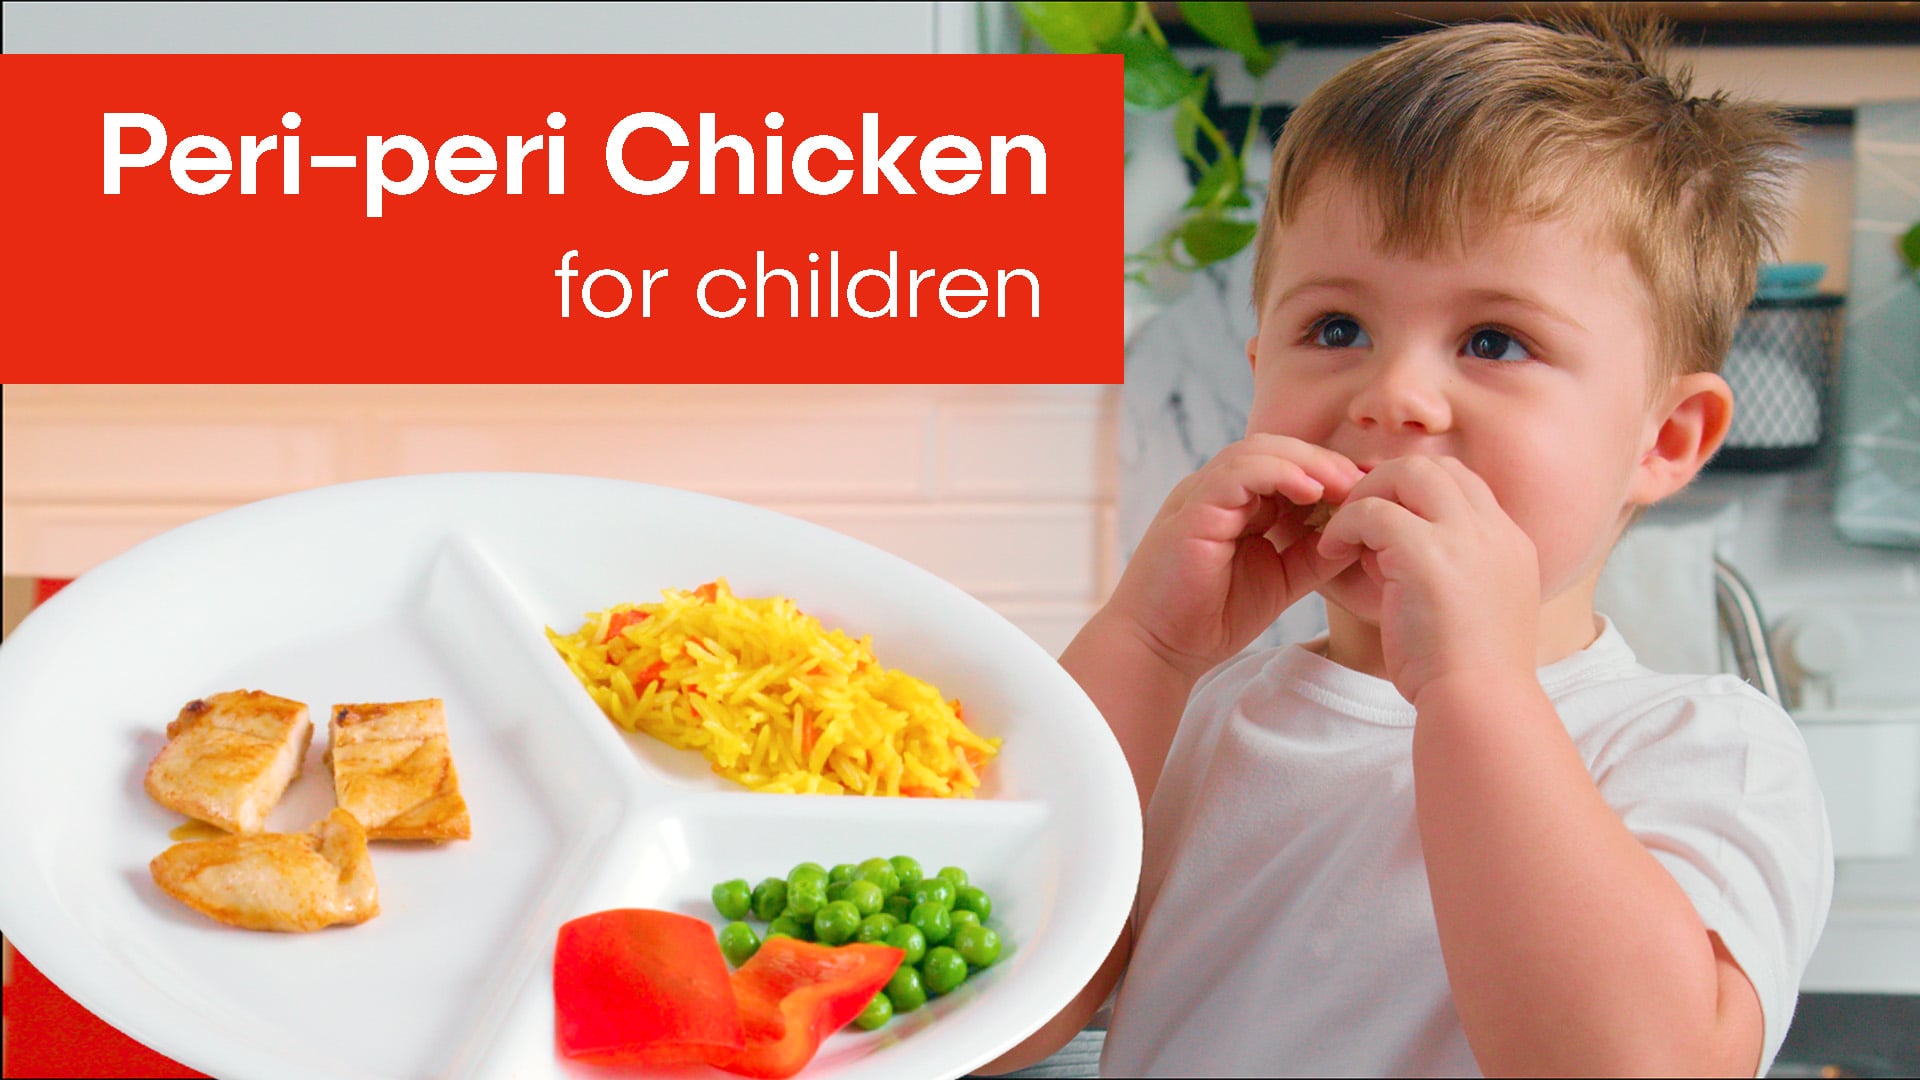 Featured image for “Cook for Children – Peri Peri Chicken – Social Video”